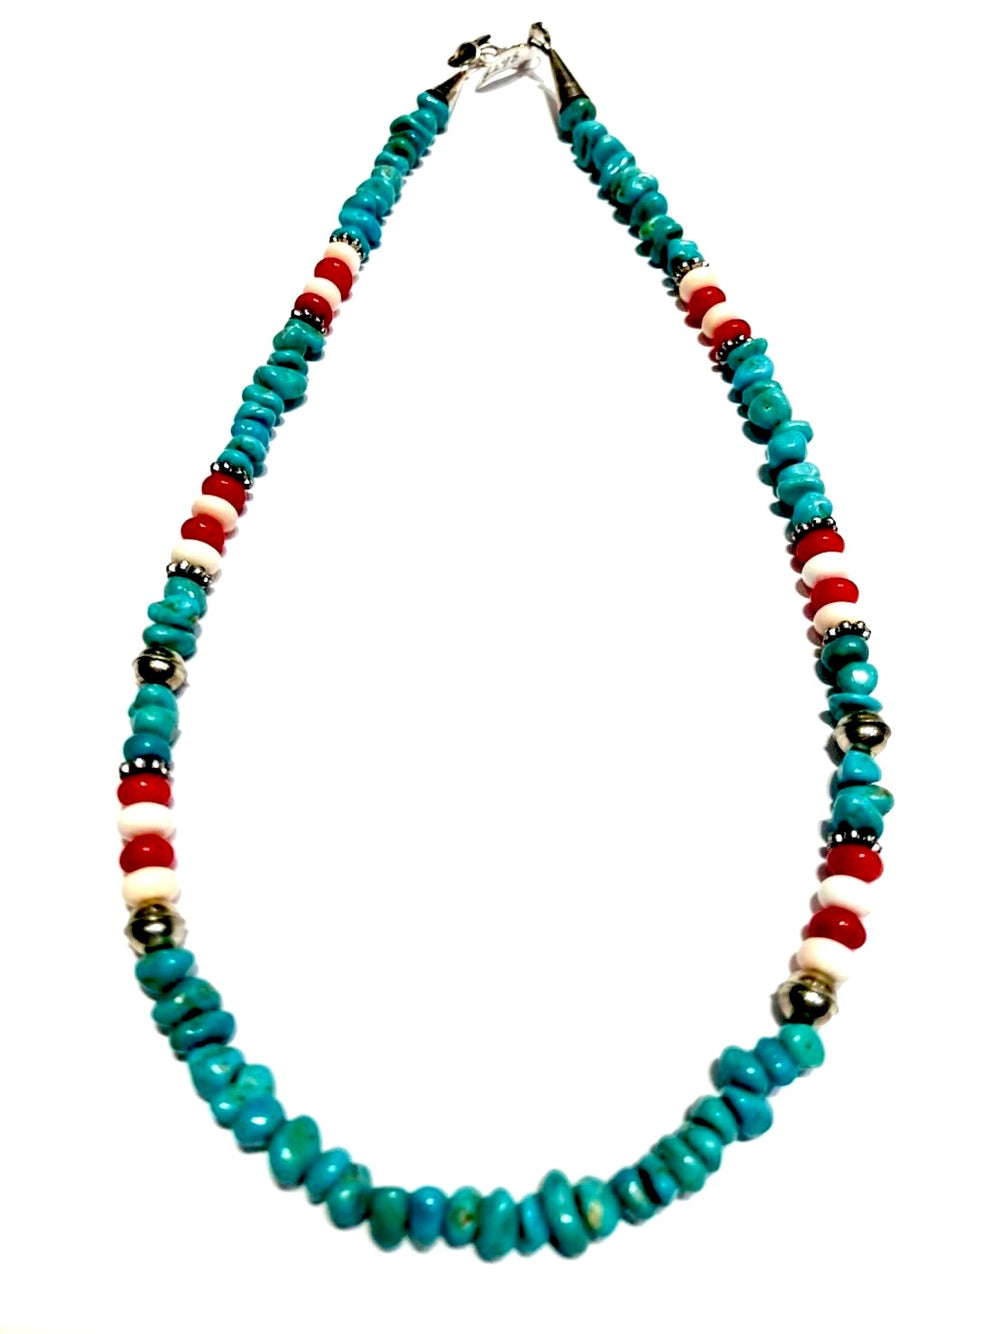 Turquoise Necklace 18inch